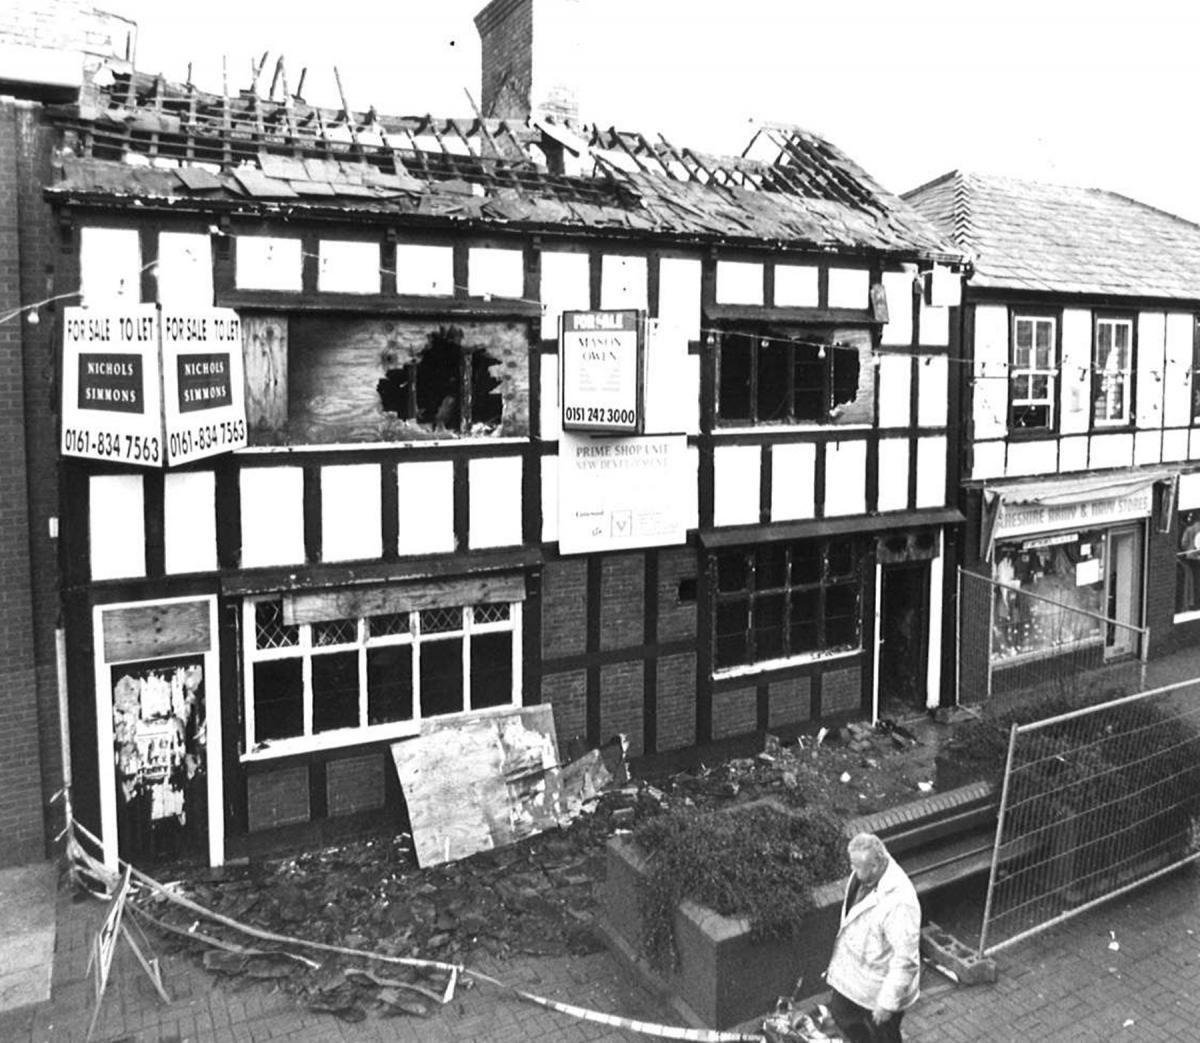 White Lion on Witton Street. Destroyed by fire, the plot remains vacant still.